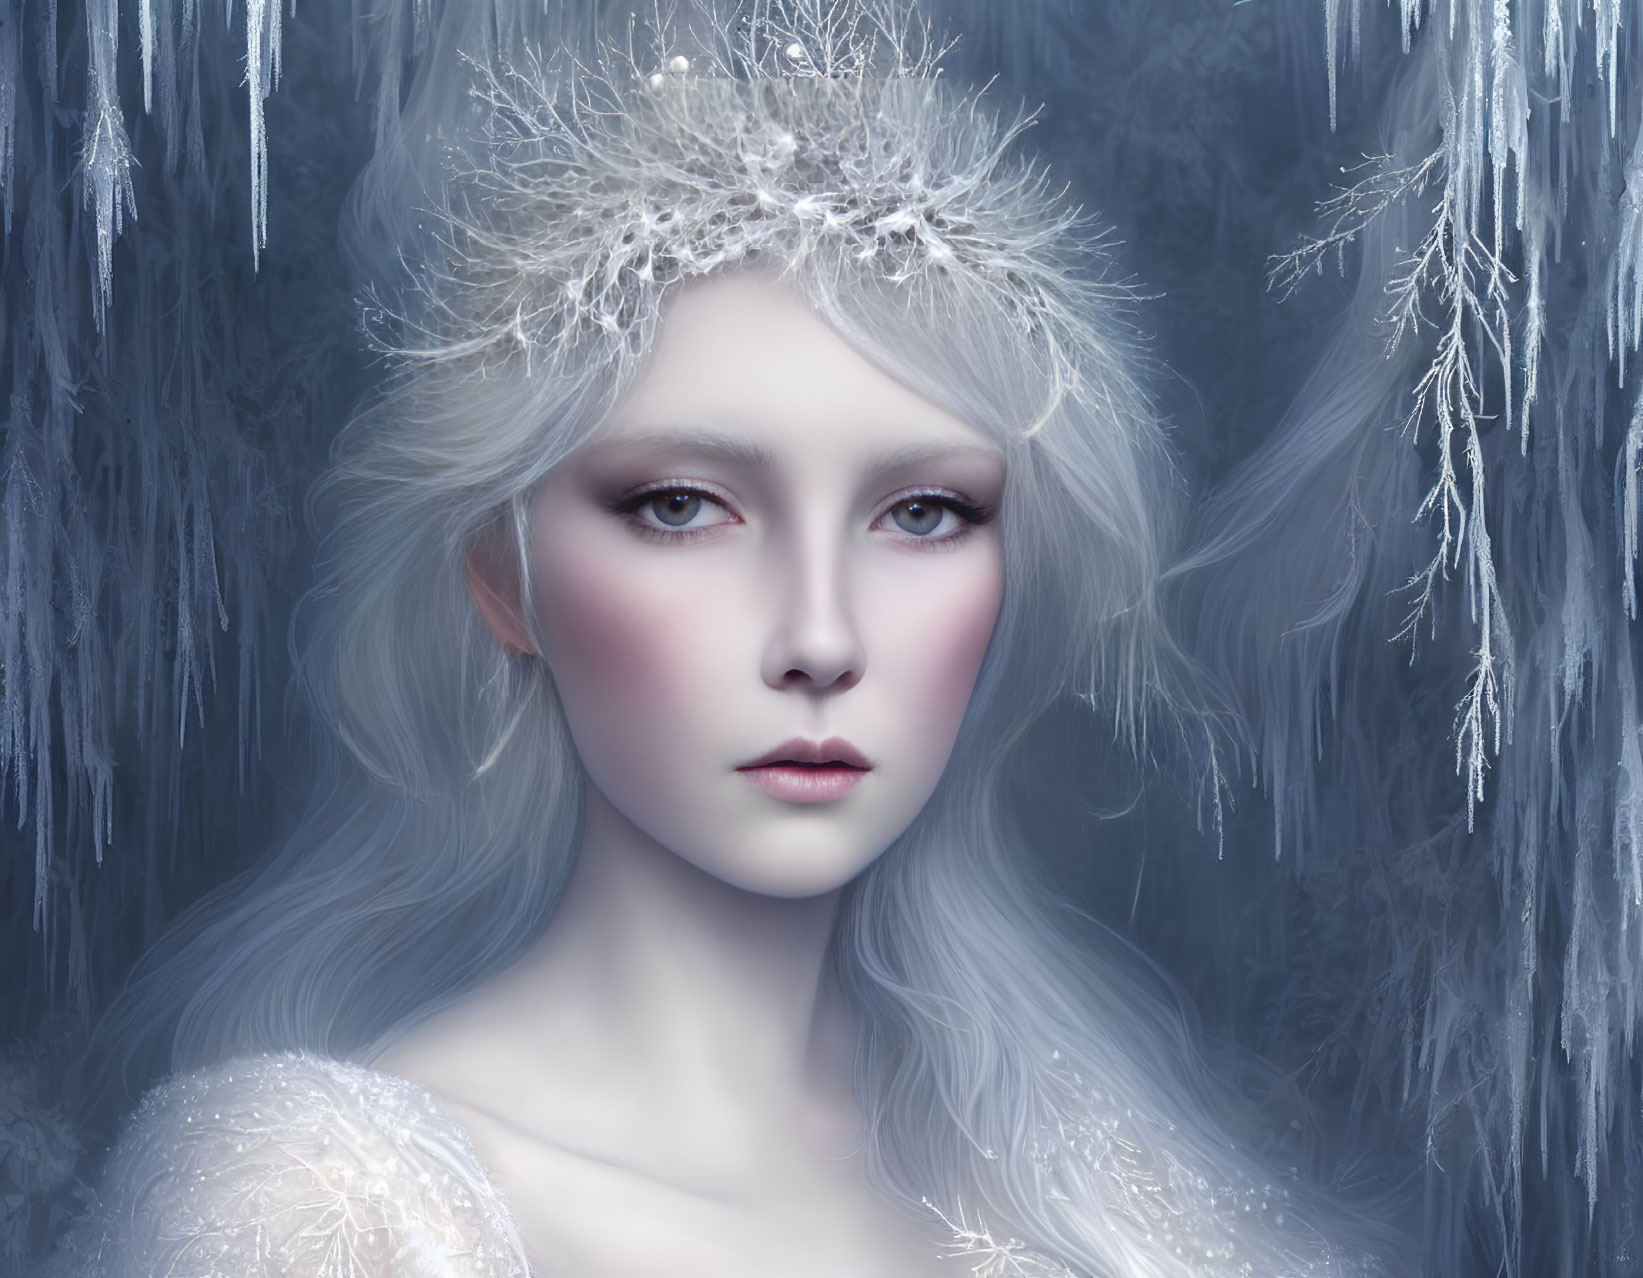 Pale Figure with Icy Eyes and Frosty Crown in Frozen Setting